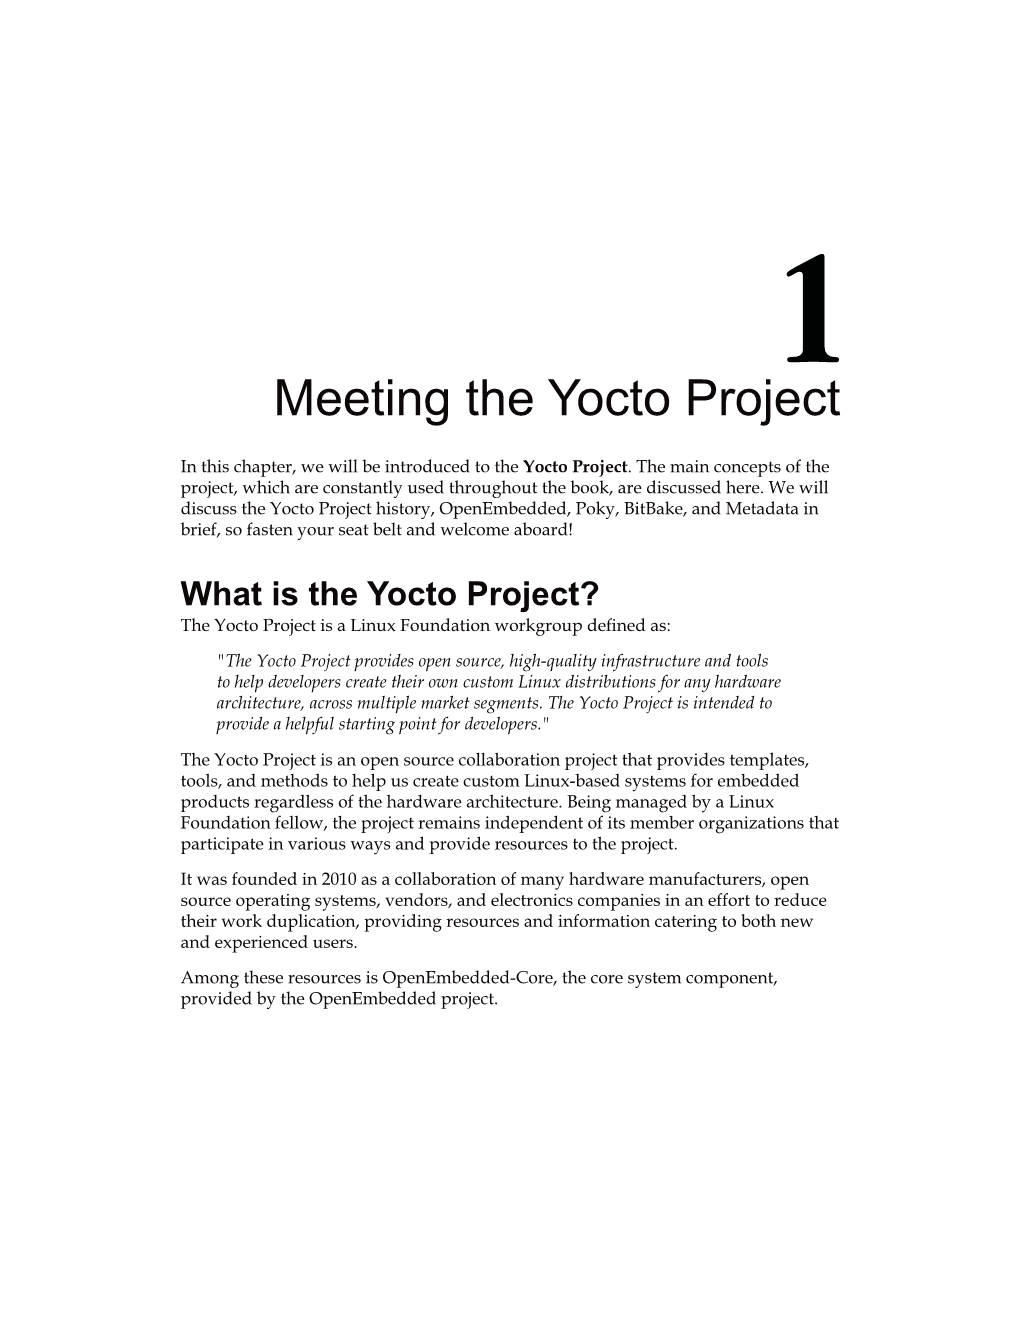 Meeting the Yocto Project